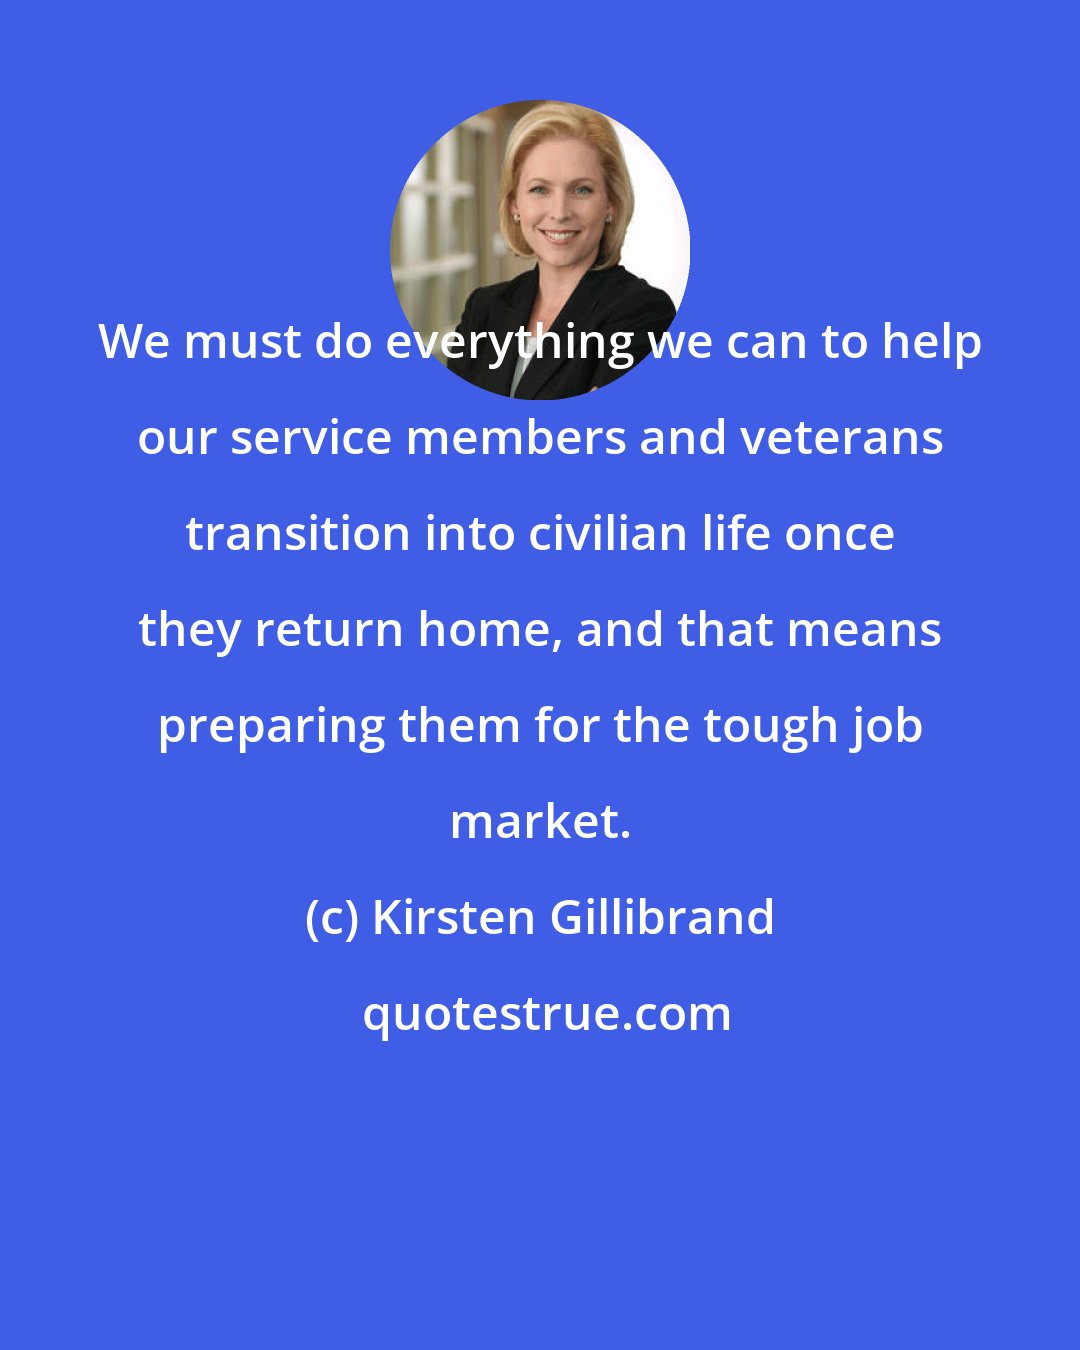 Kirsten Gillibrand: We must do everything we can to help our service members and veterans transition into civilian life once they return home, and that means preparing them for the tough job market.